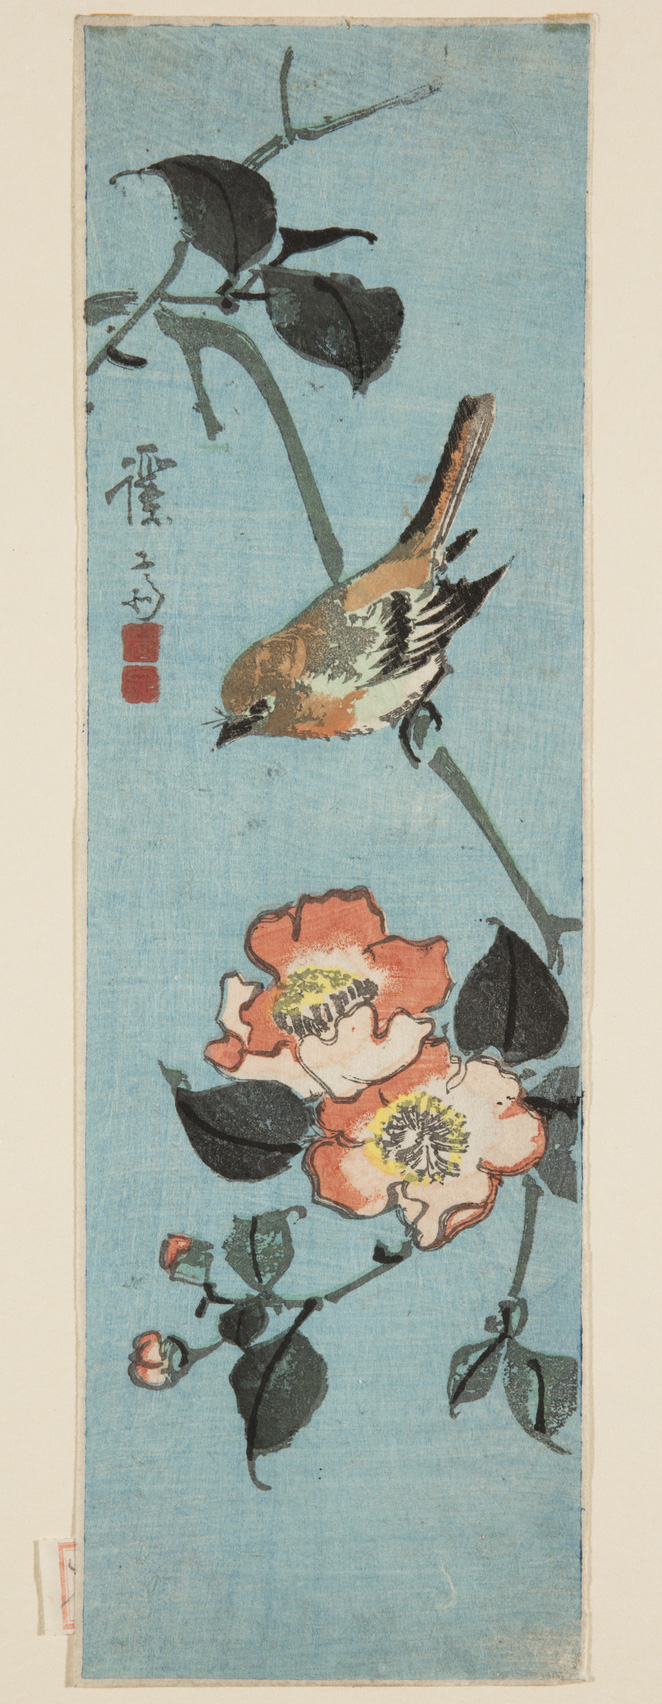 Japanese print of a sparrow sat on a branch with leaves and flowers.